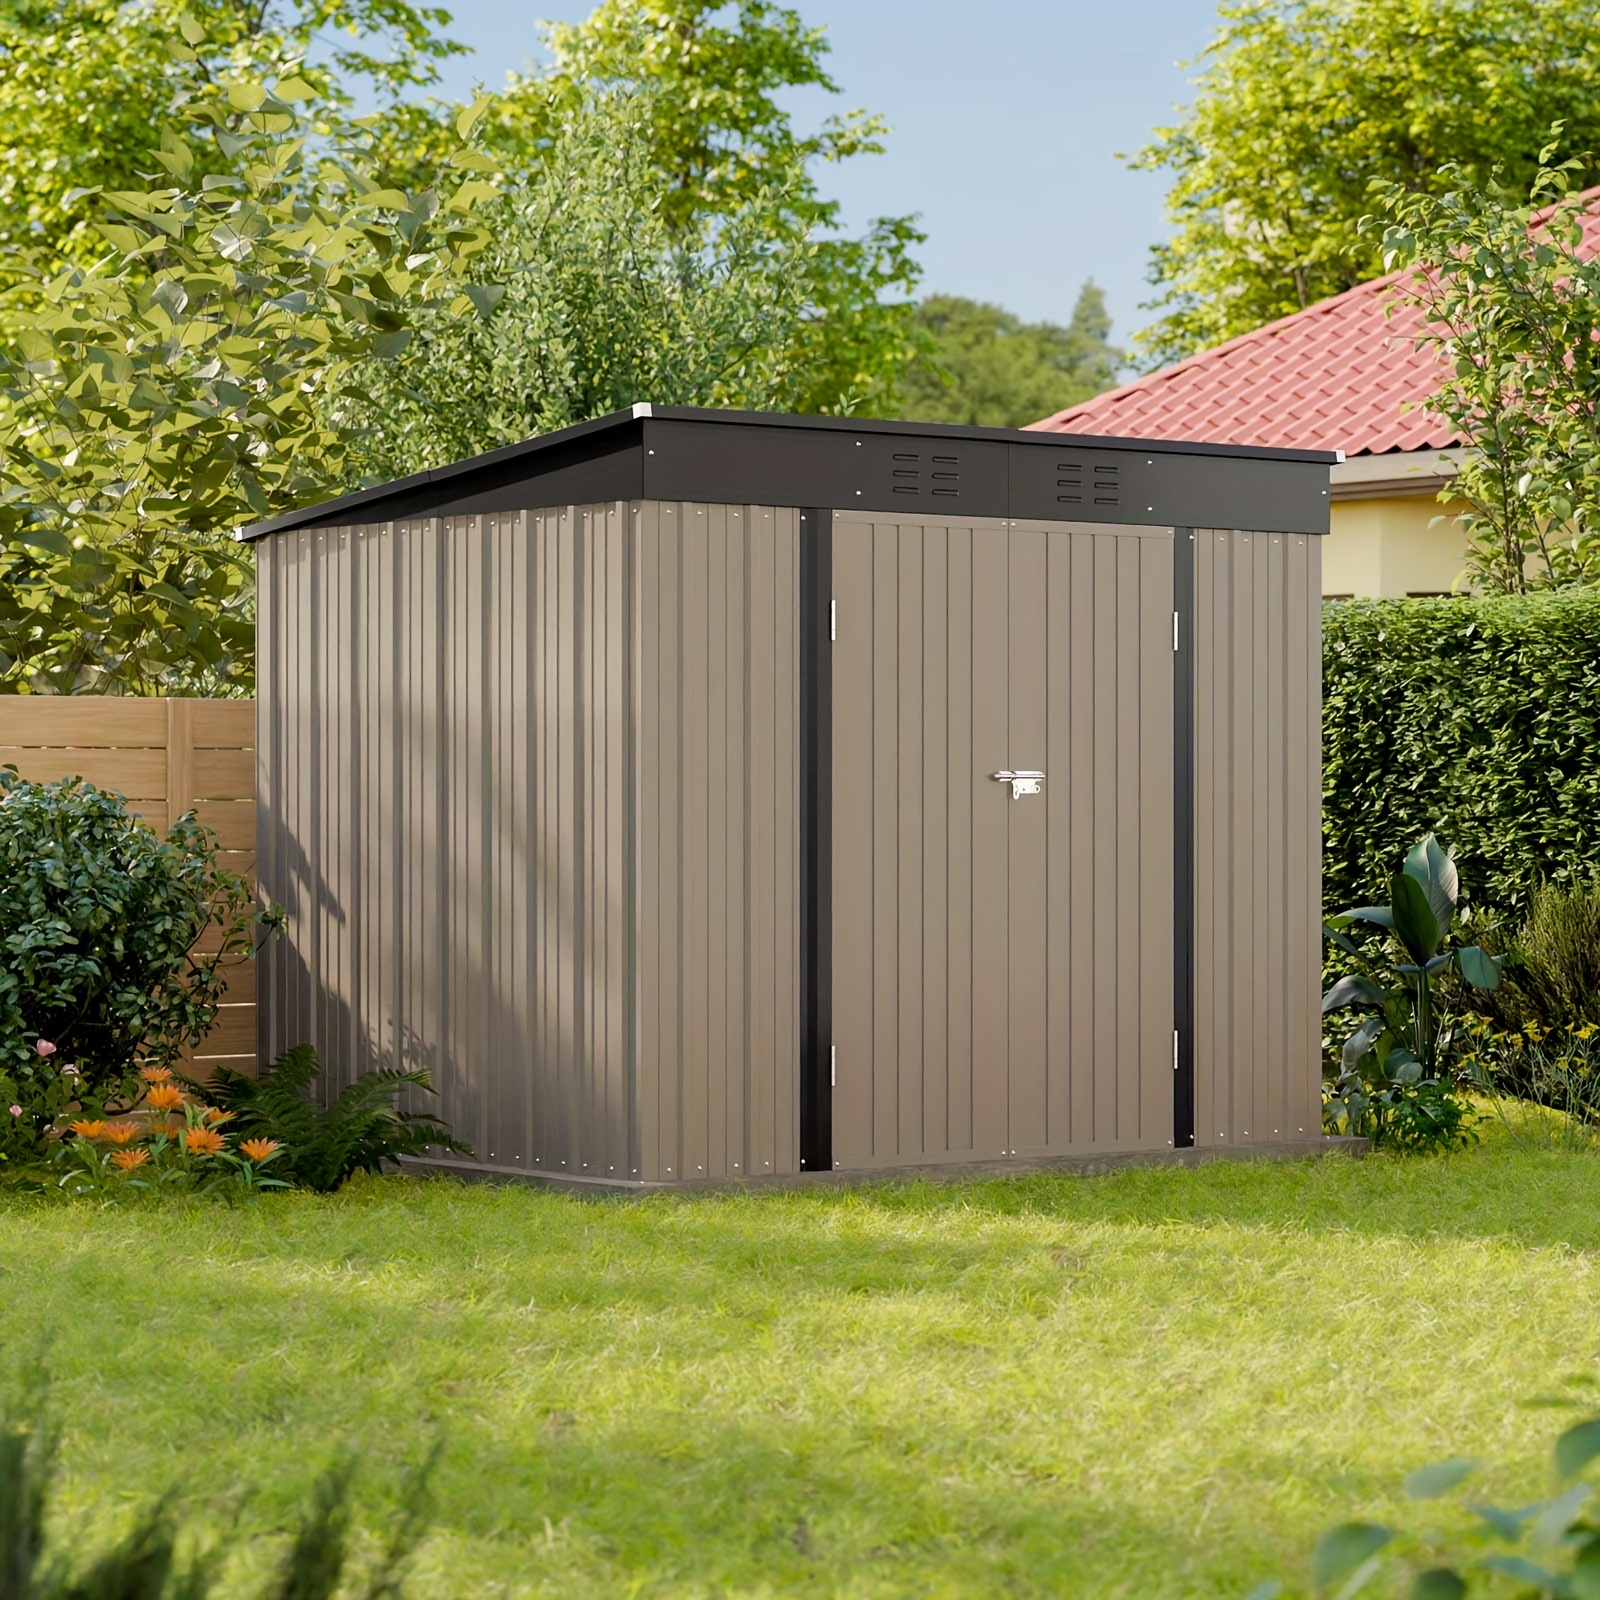 

8' X 6' Metal Outdoor Storage Shed, Metal Shed With Vents And Lock, Galvanized Steel Construction Ensures Water-resistance And Uv-resistance For Lawn, Patio, Or Backyard Storage Needs